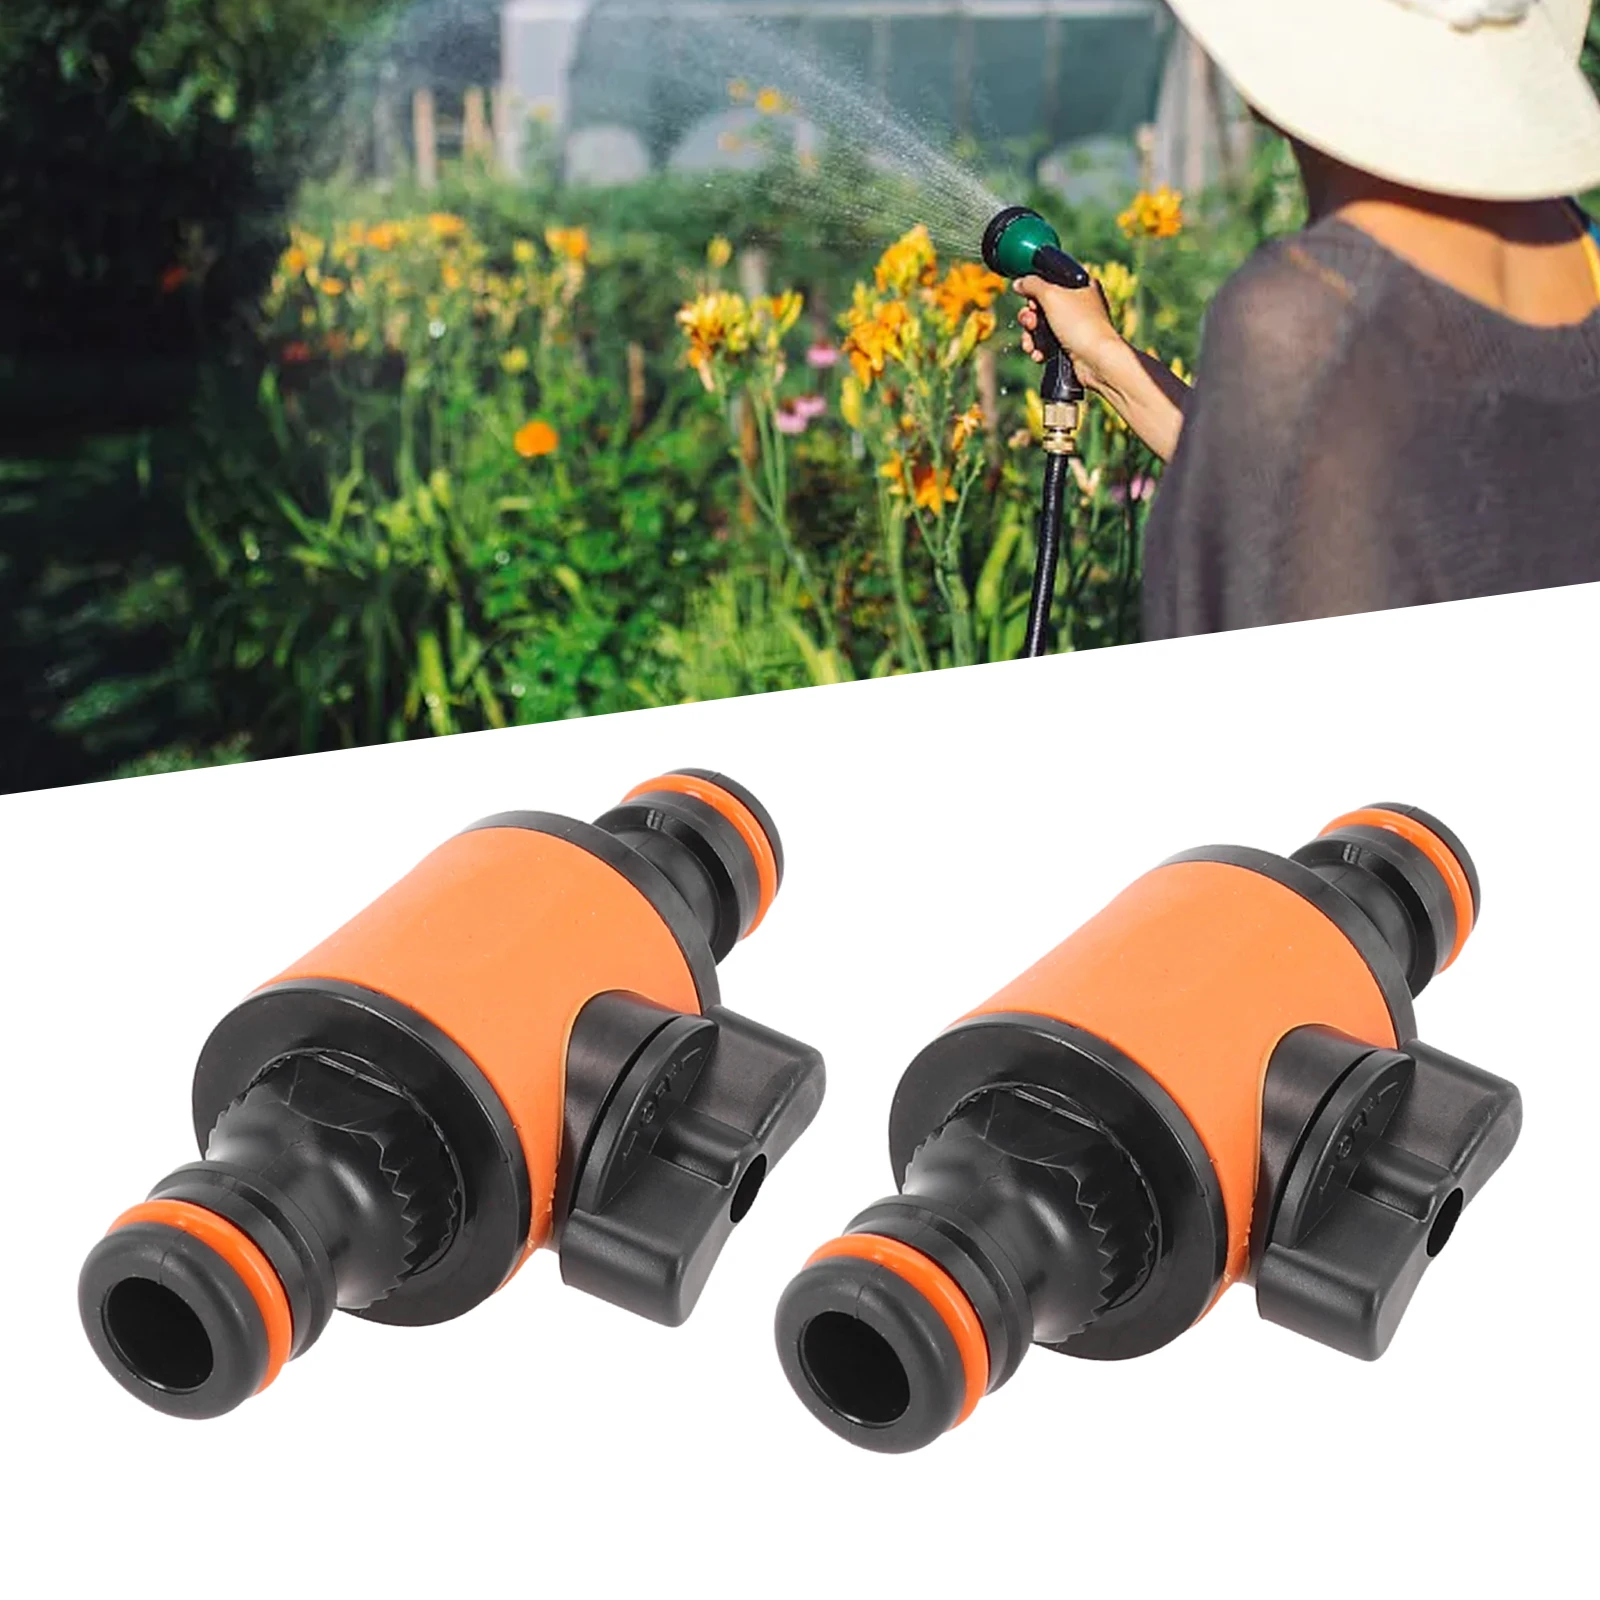 

2Pcs Quick Connector Hose Pipe Tap Shut Off Valve Fitting Garden Quick Coupler For Watering Irrigation Connectors